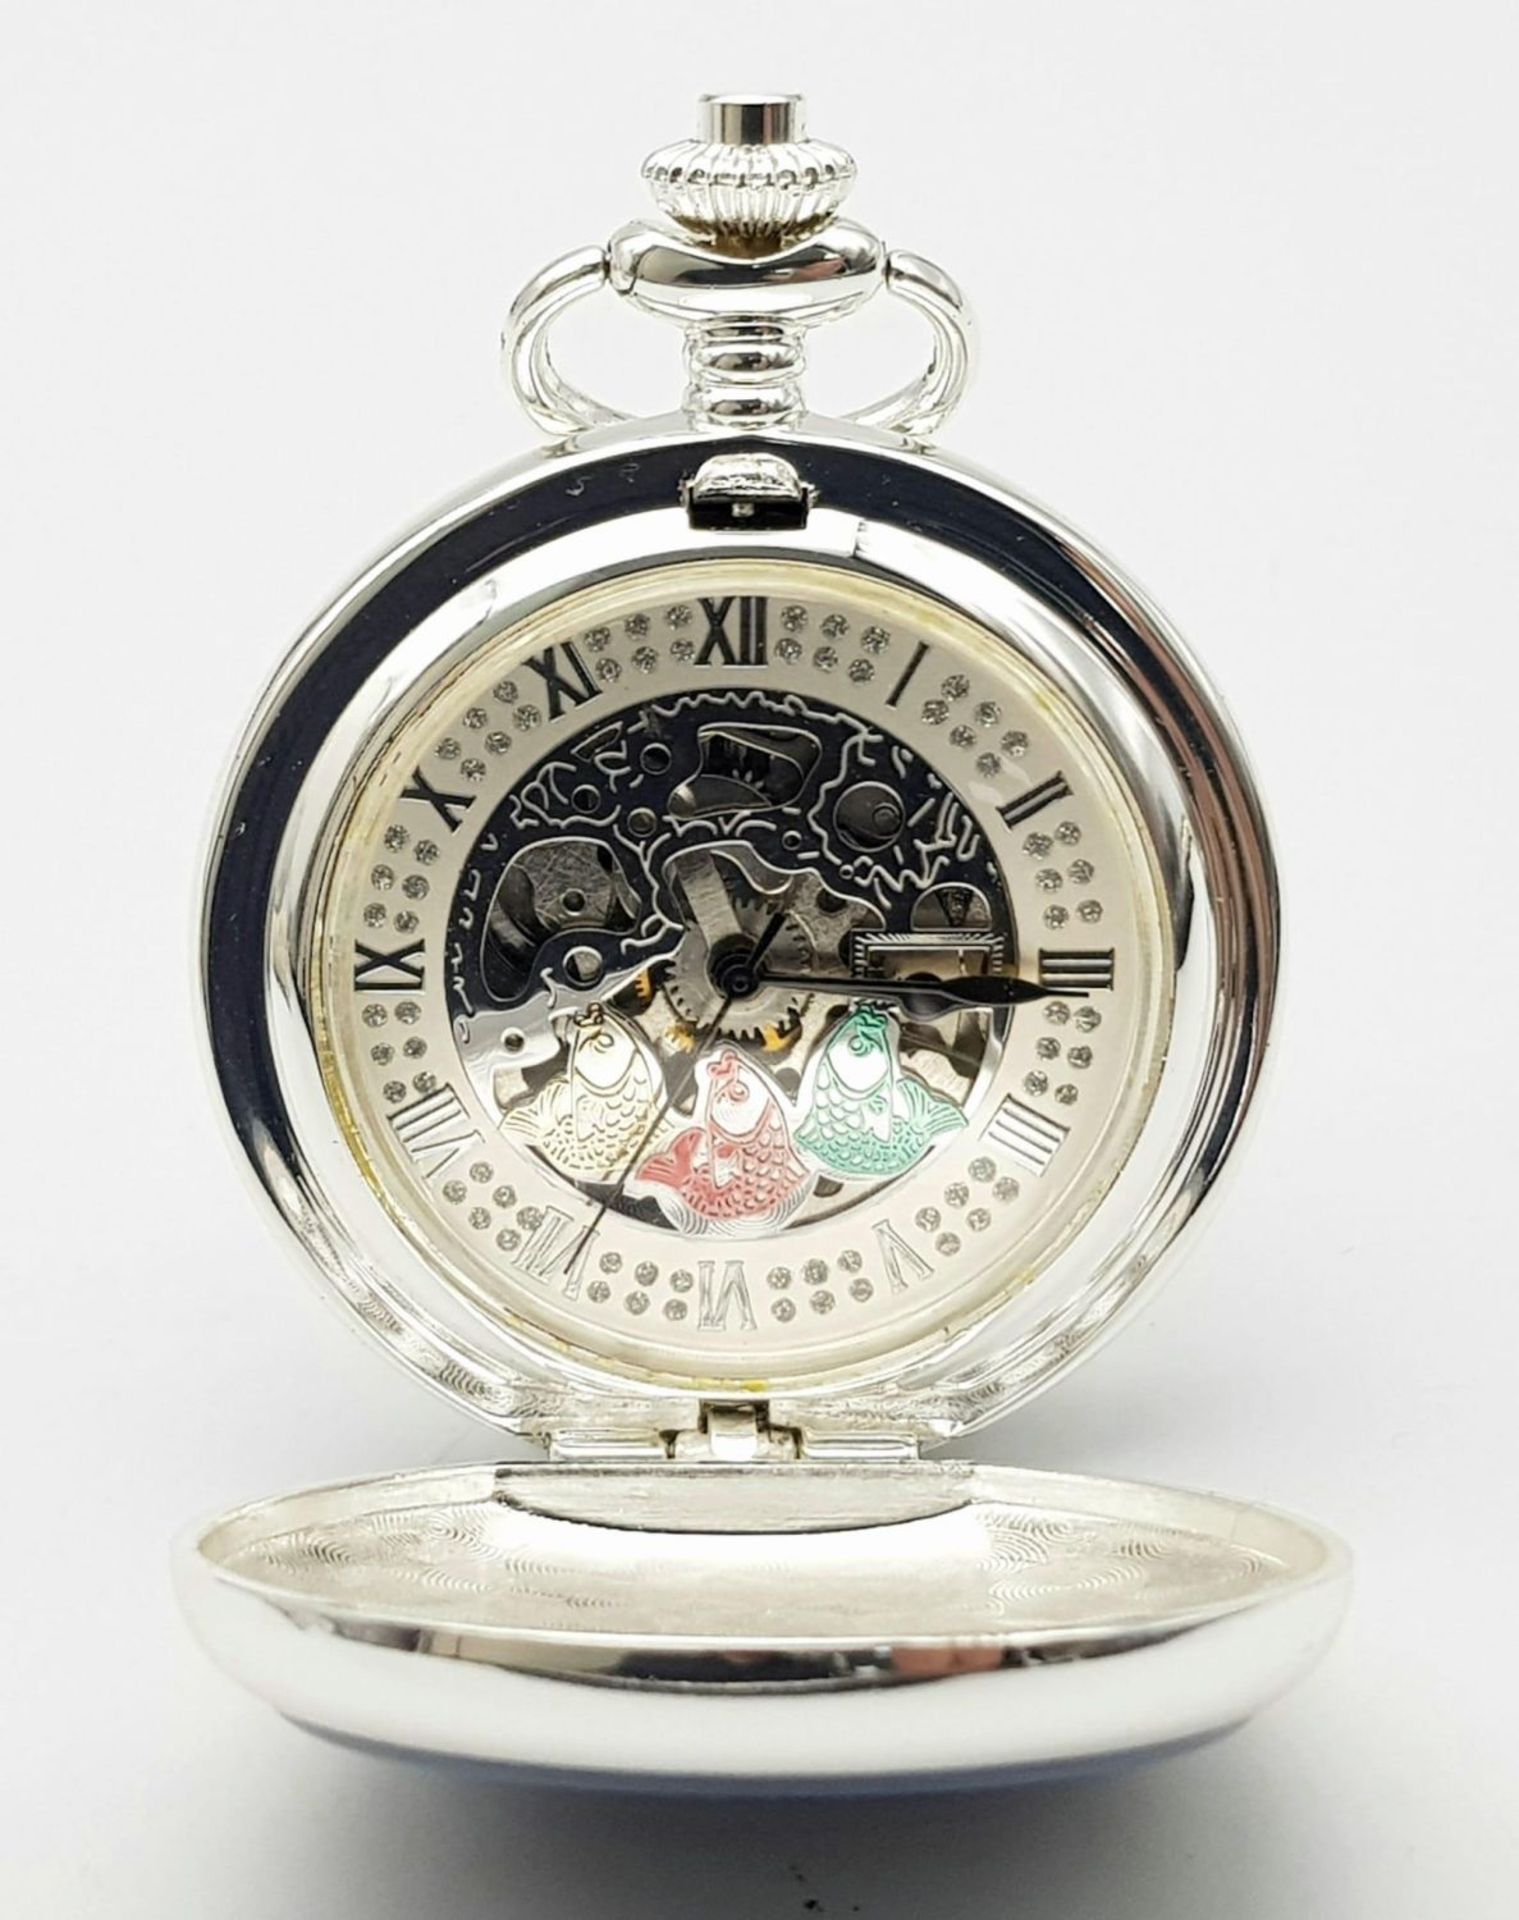 A Manual Wind Silver Plated Pocket Watch Detailing the Famous Steam Train ‘City of Truro’. The First - Bild 7 aus 10